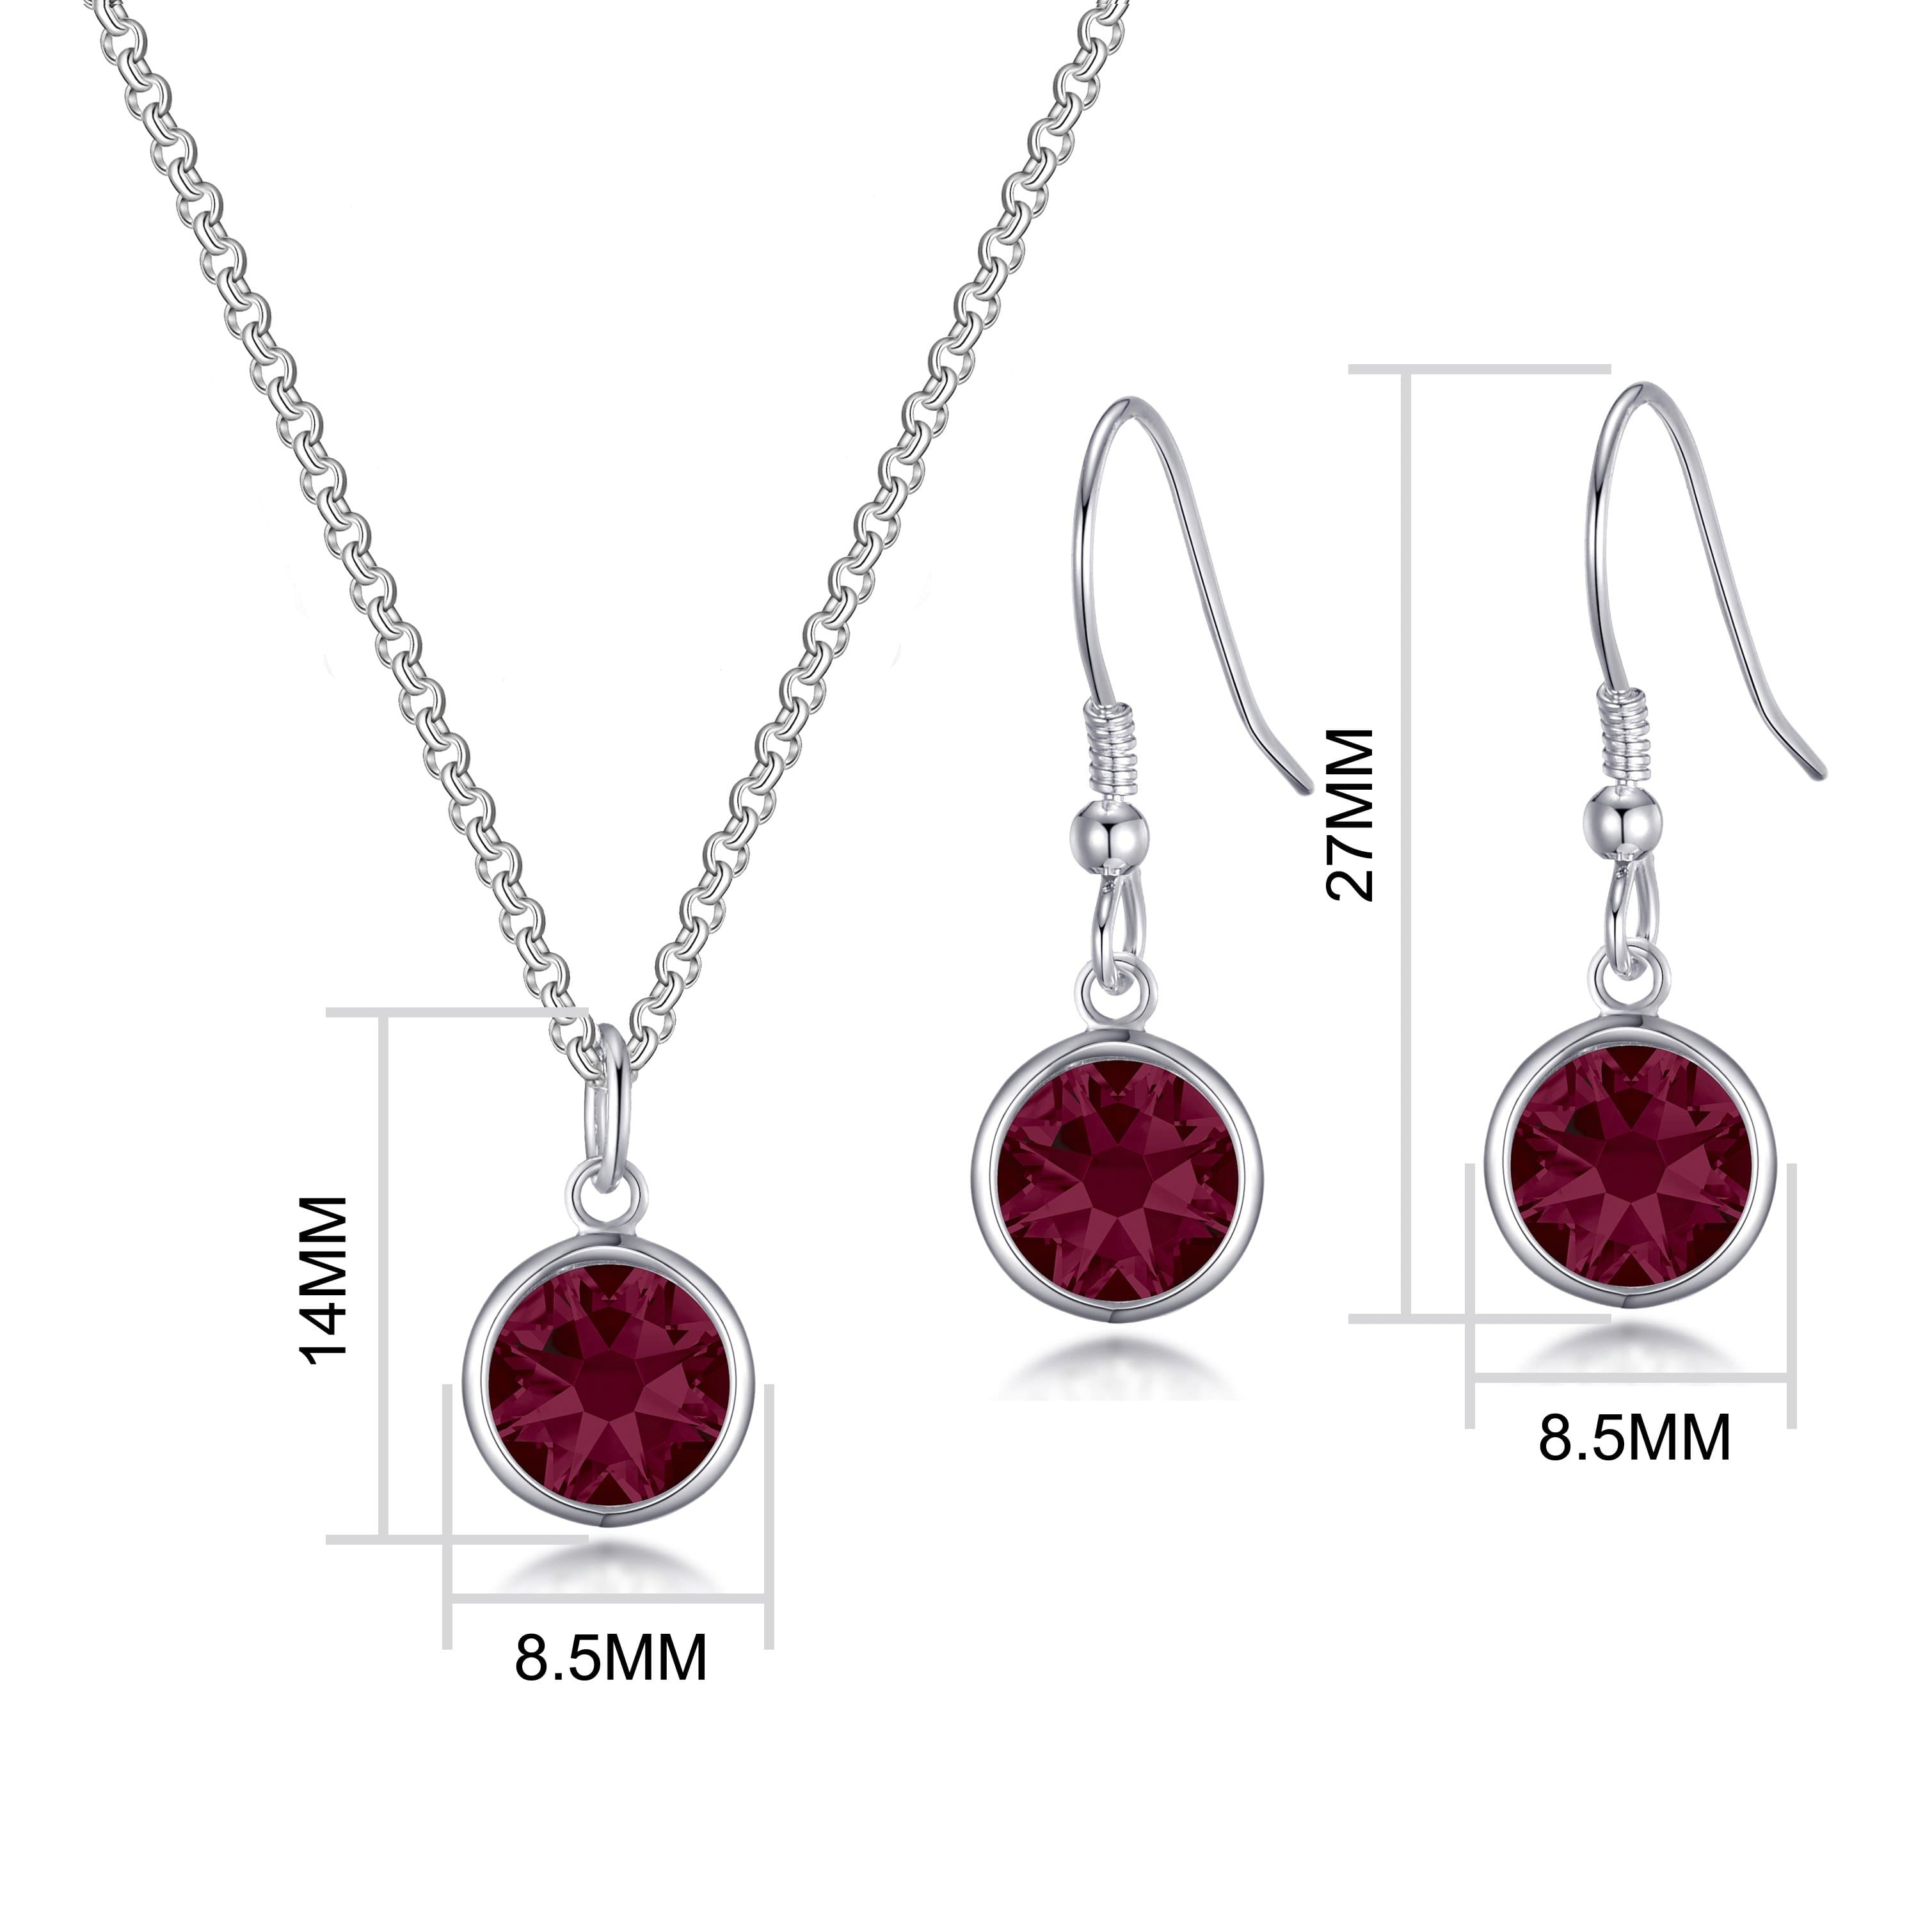 July (Ruby) Birthstone Necklace & Drop Earrings Set Created with Zircondia® Crystals